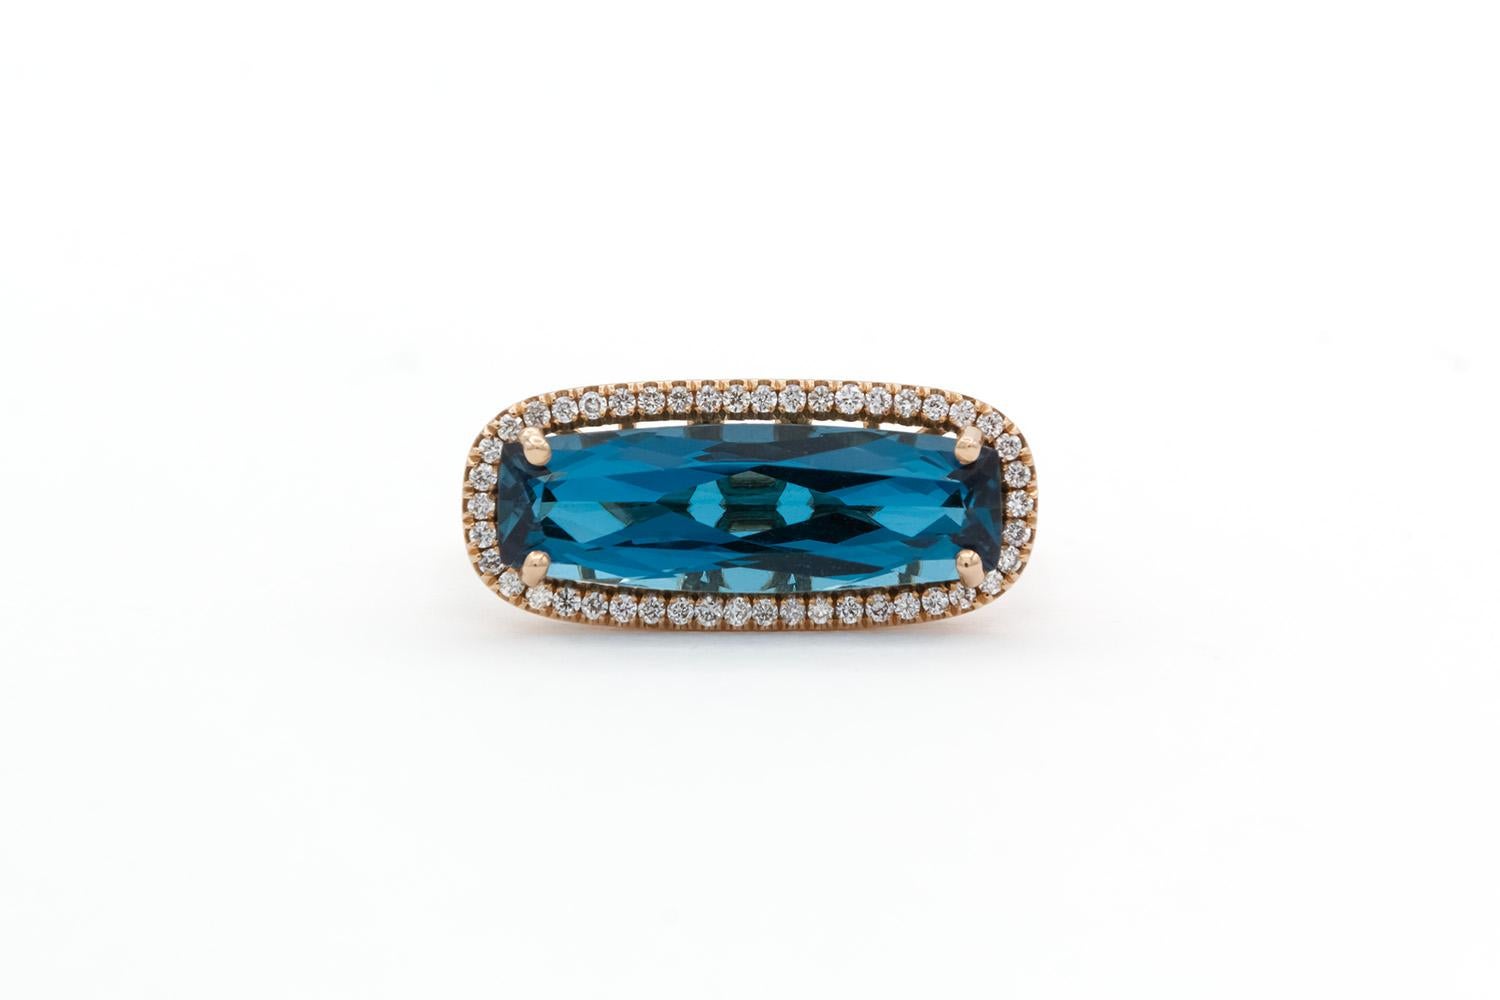 We are pleased to offer this Brand New Unworn Suzanne Kalan 18k Rose Gold Blue Topaz & Diamond Ring. This stunning ring features an elongated oval cut natural blue topaz accented by 0.35ctw round brilliant cut diamonds all set in 18k rose gold. The